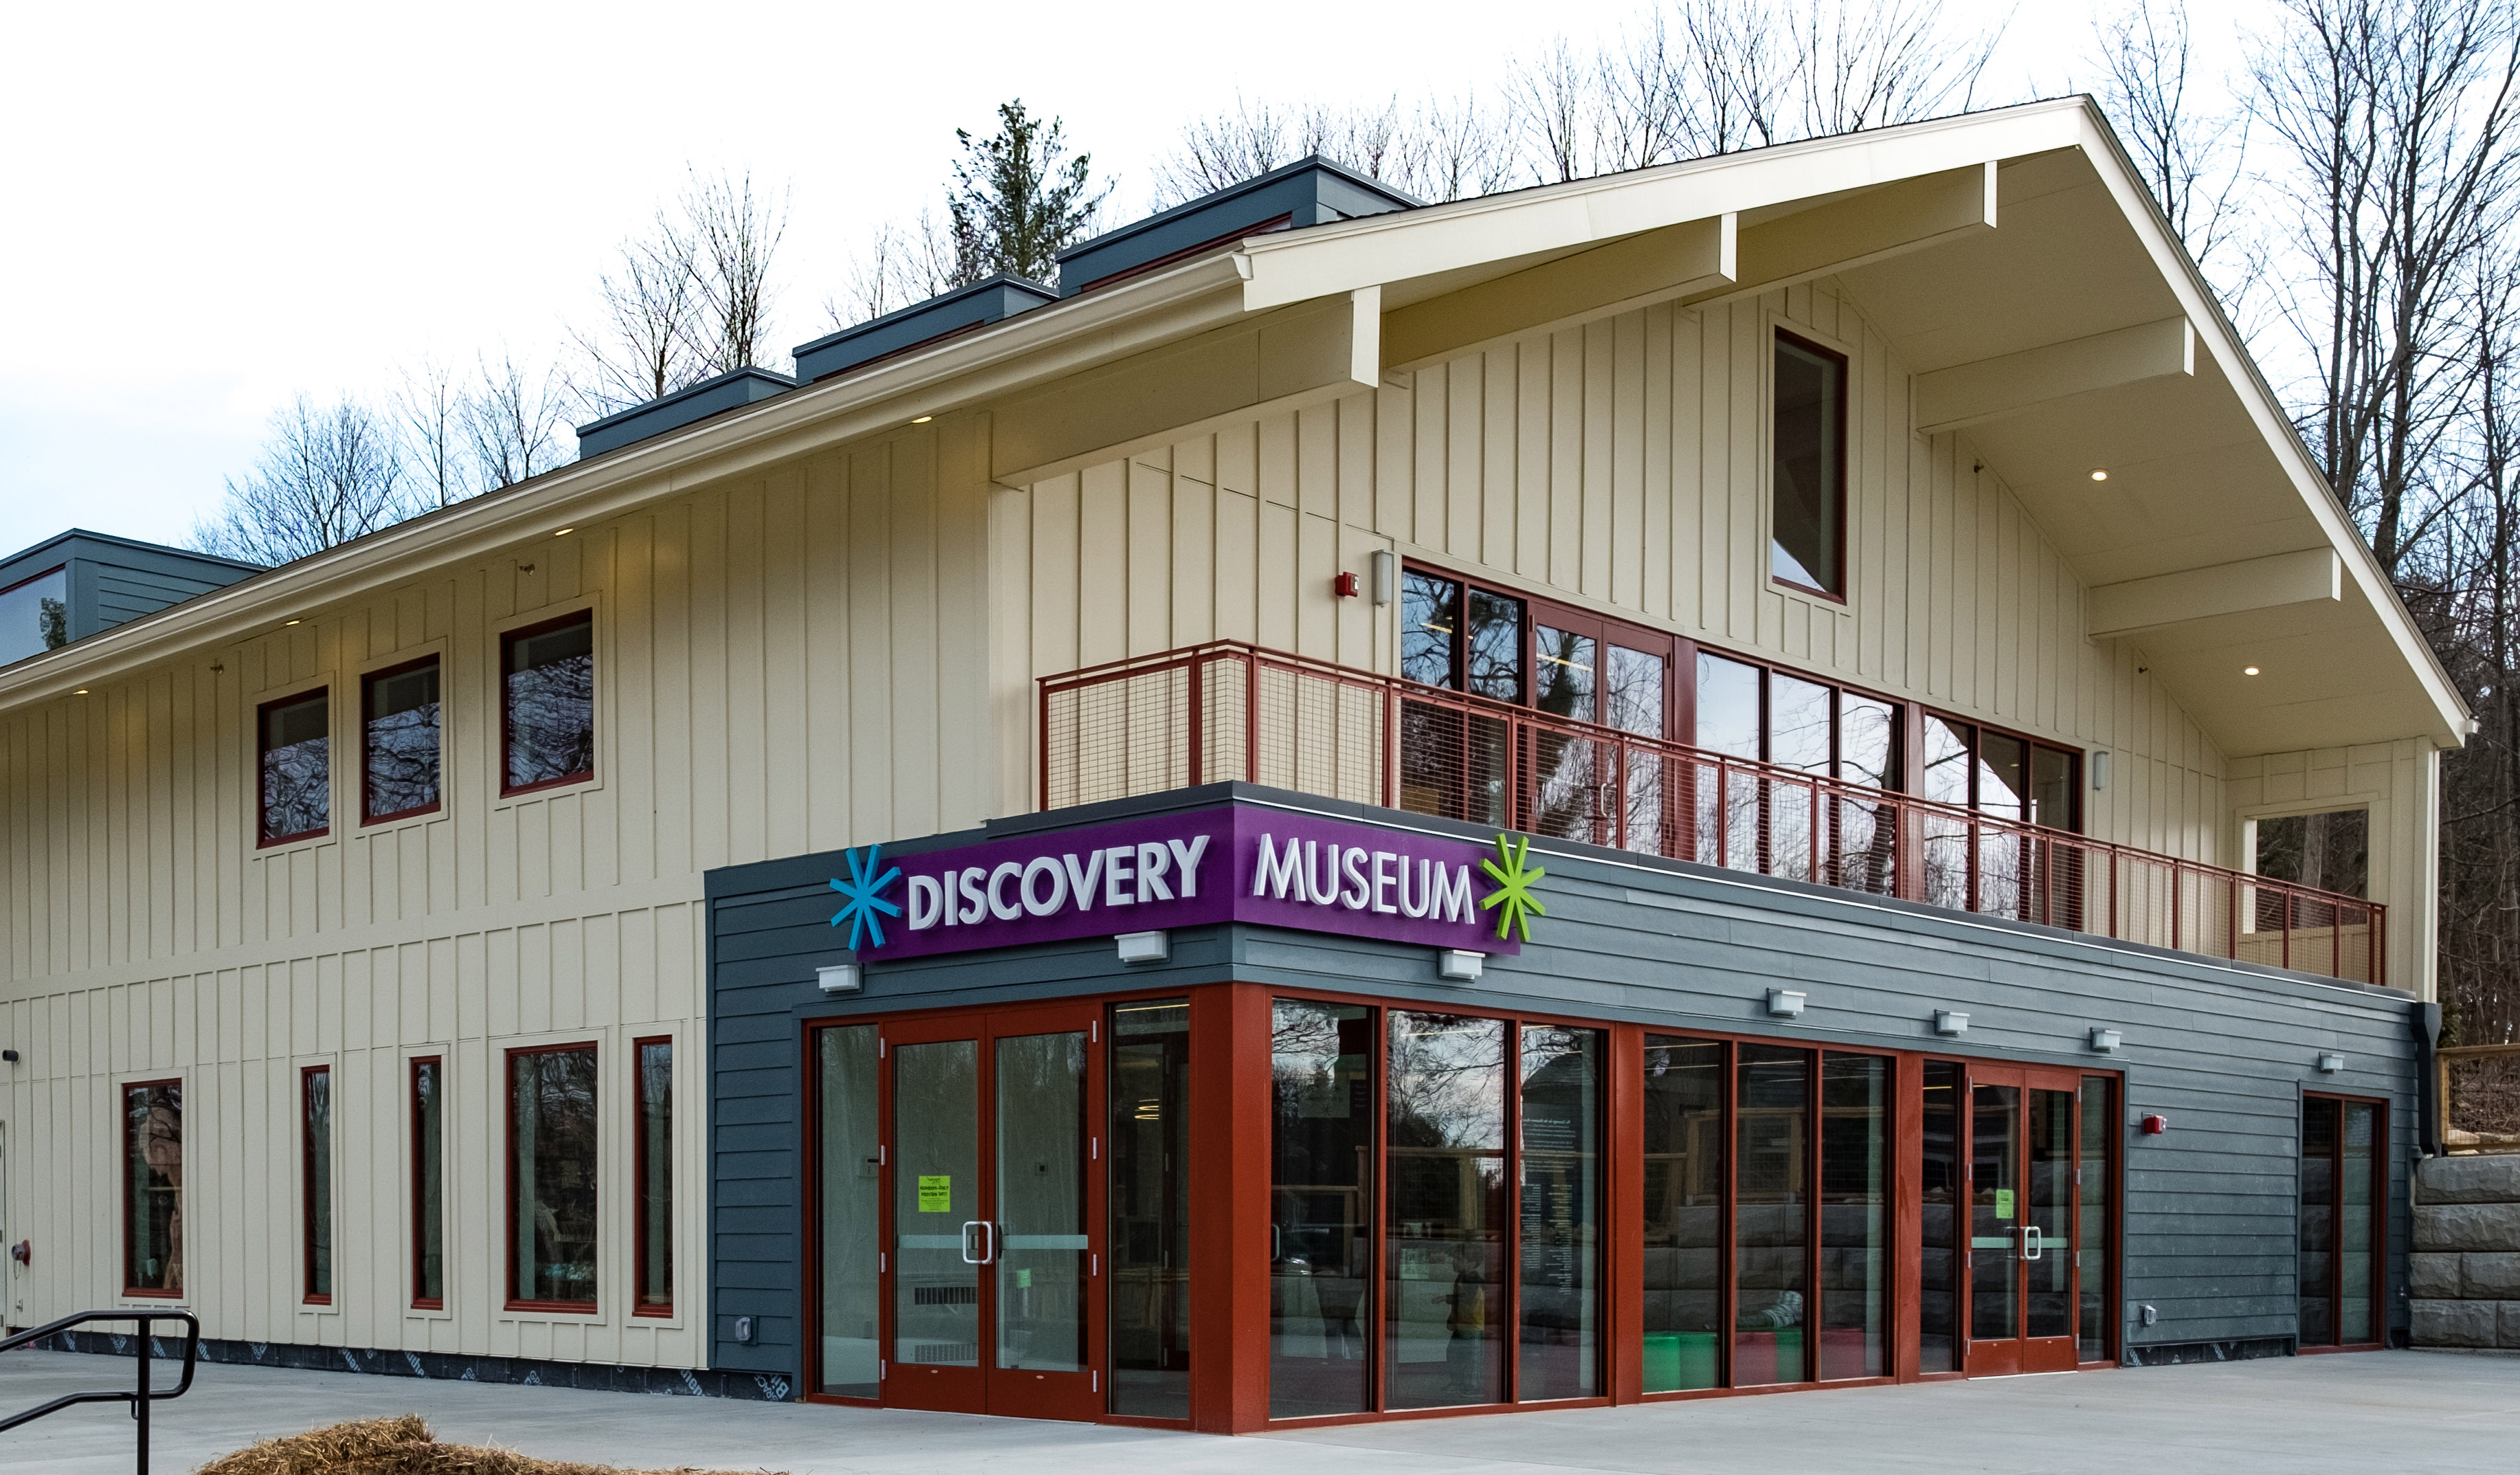 Discovery Museum - Acton, MA